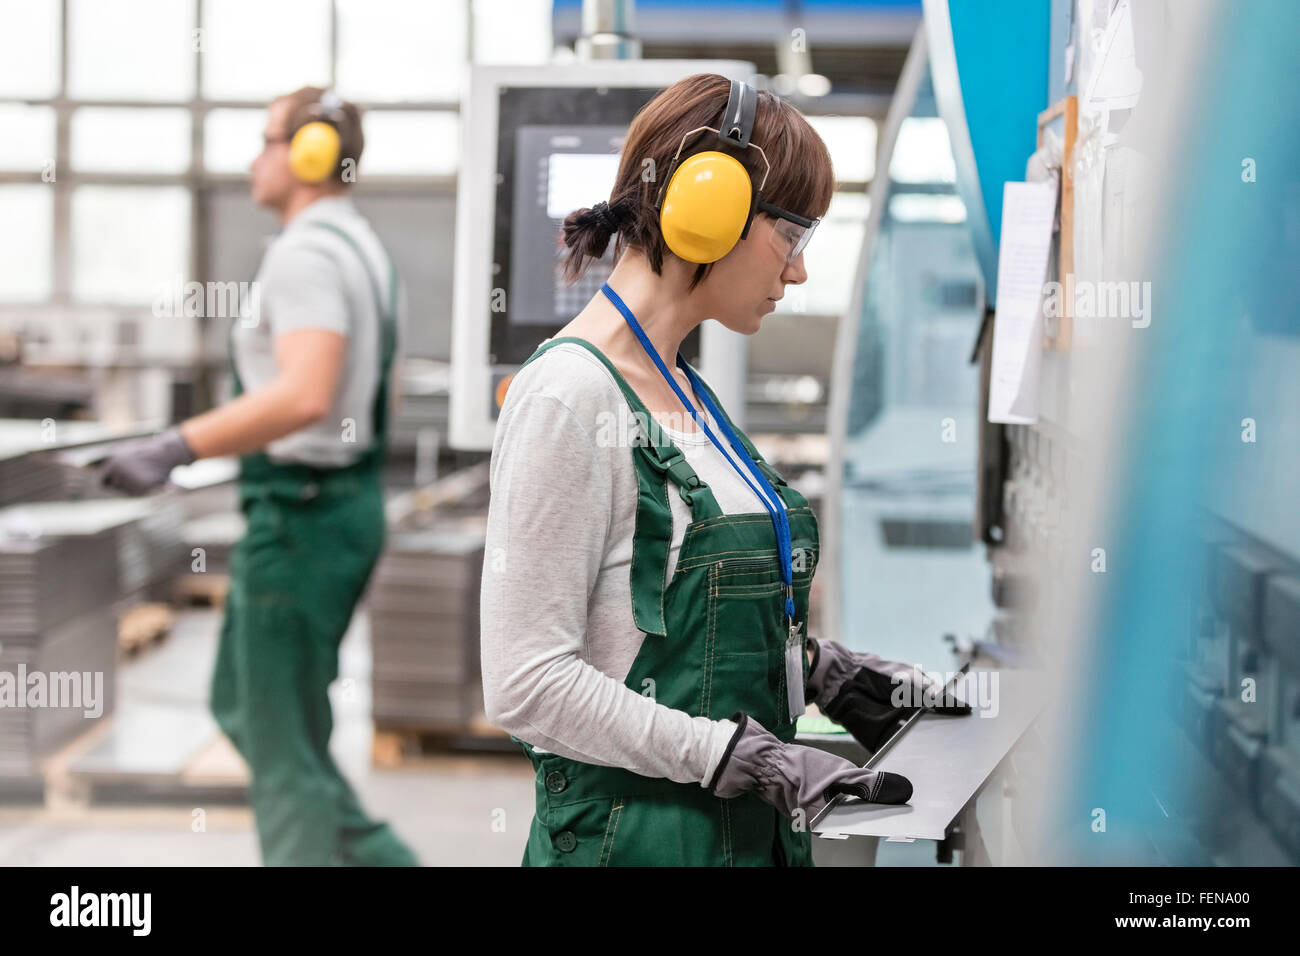 Female worker with ear protectors holding metal part in factory Stock Photo